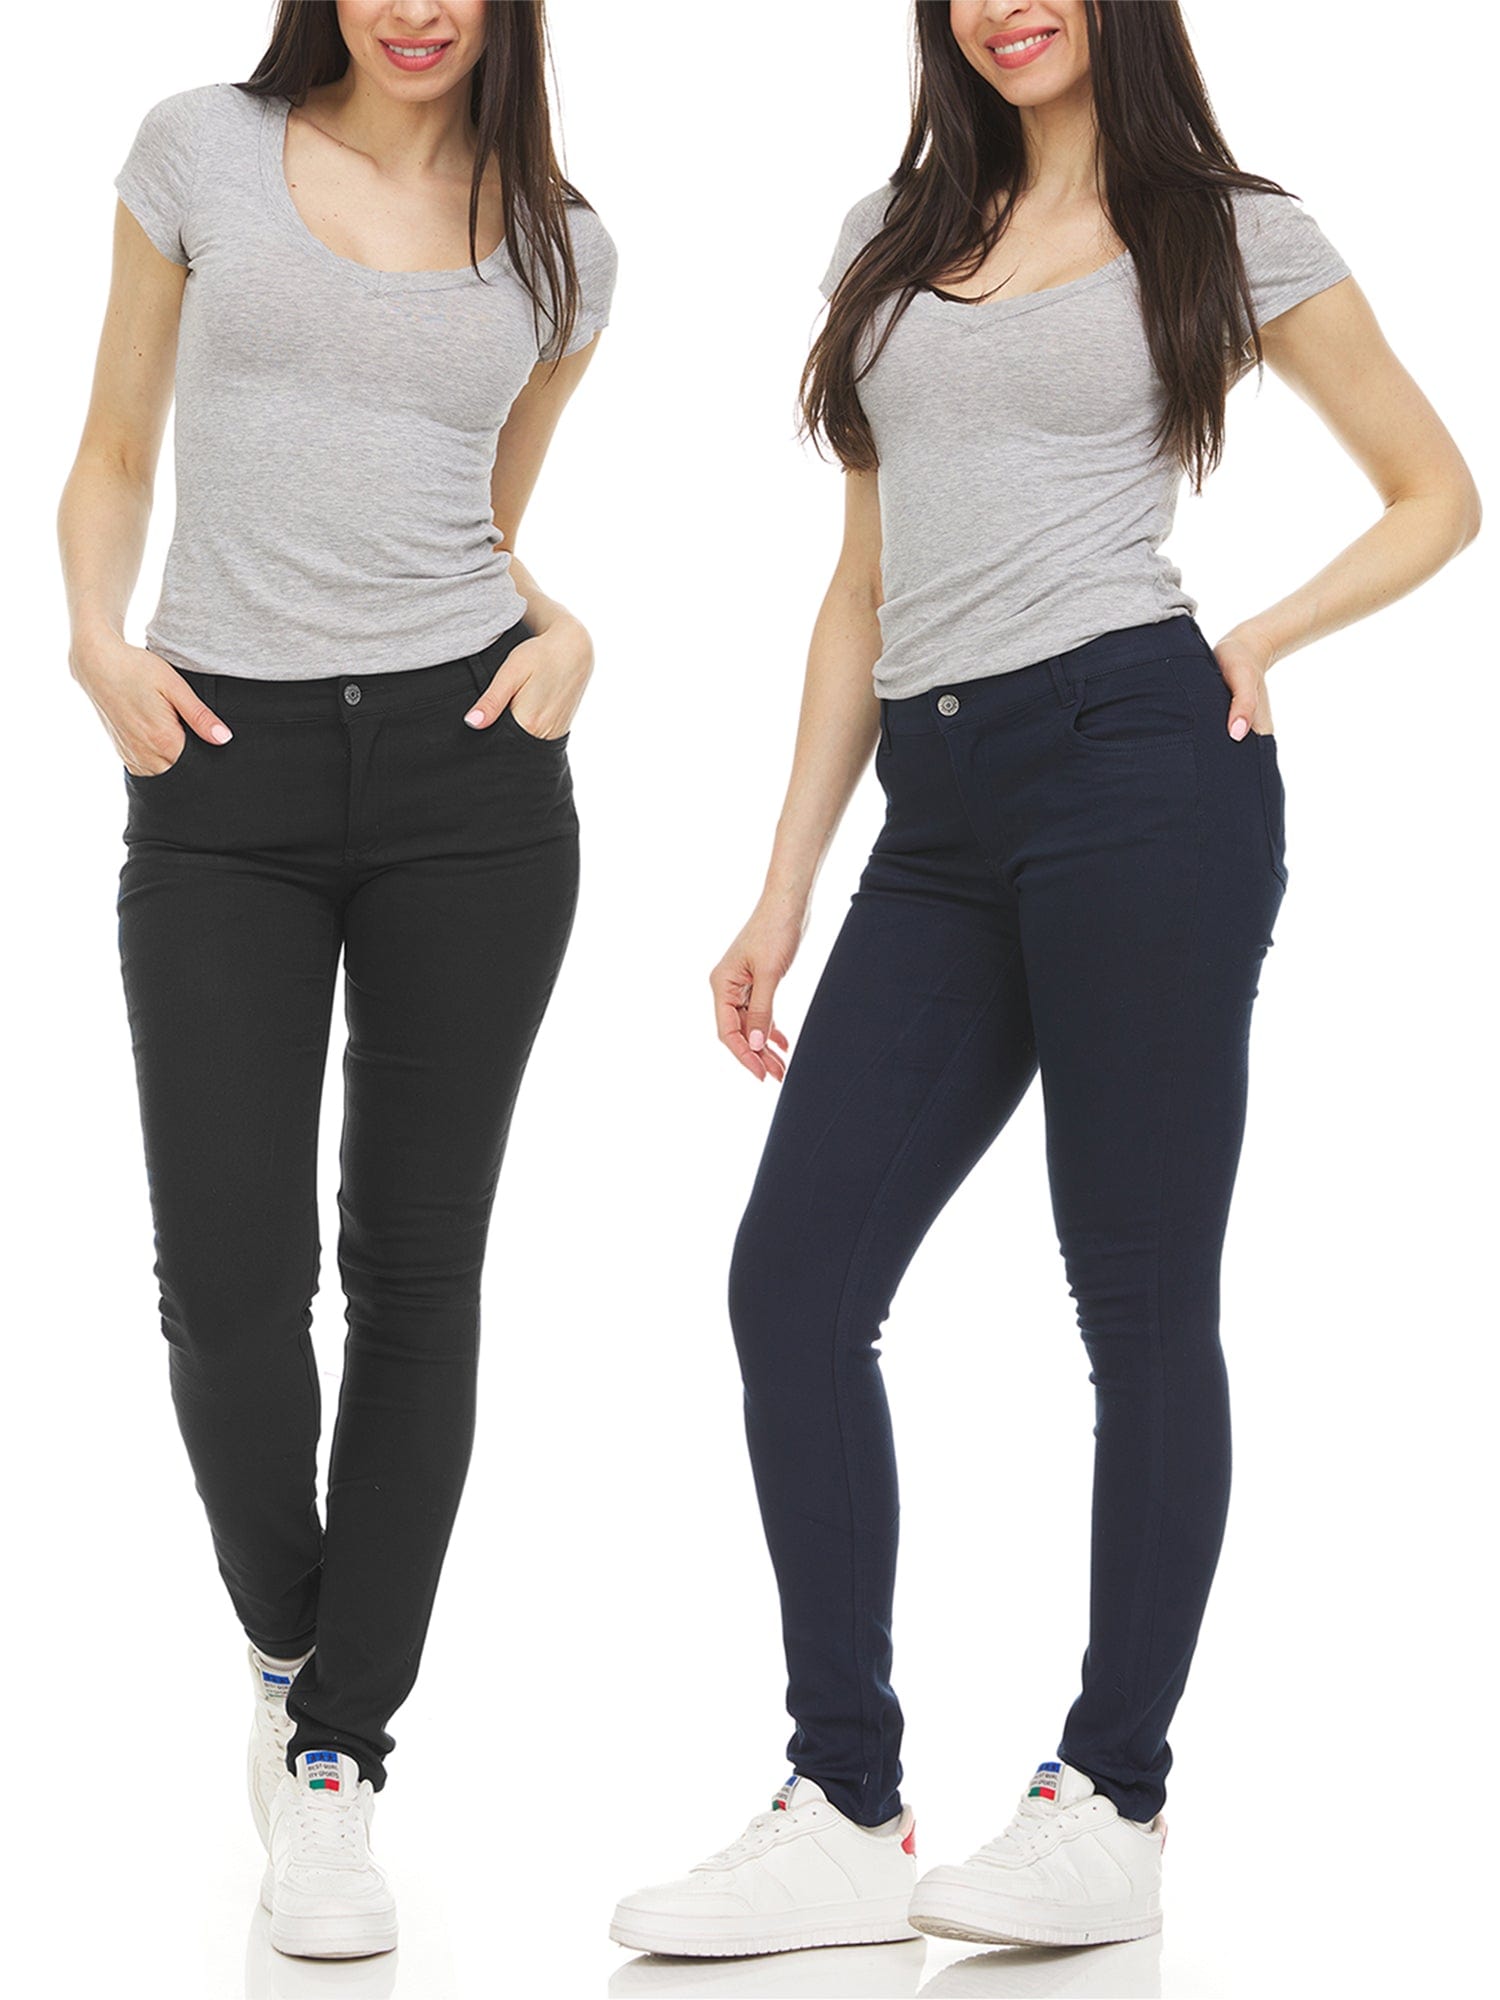 Girl's (2-PACK) Super Stretchy Skinny 5-Pocket Uniform Soft Chino Pants - GalaxybyHarvic